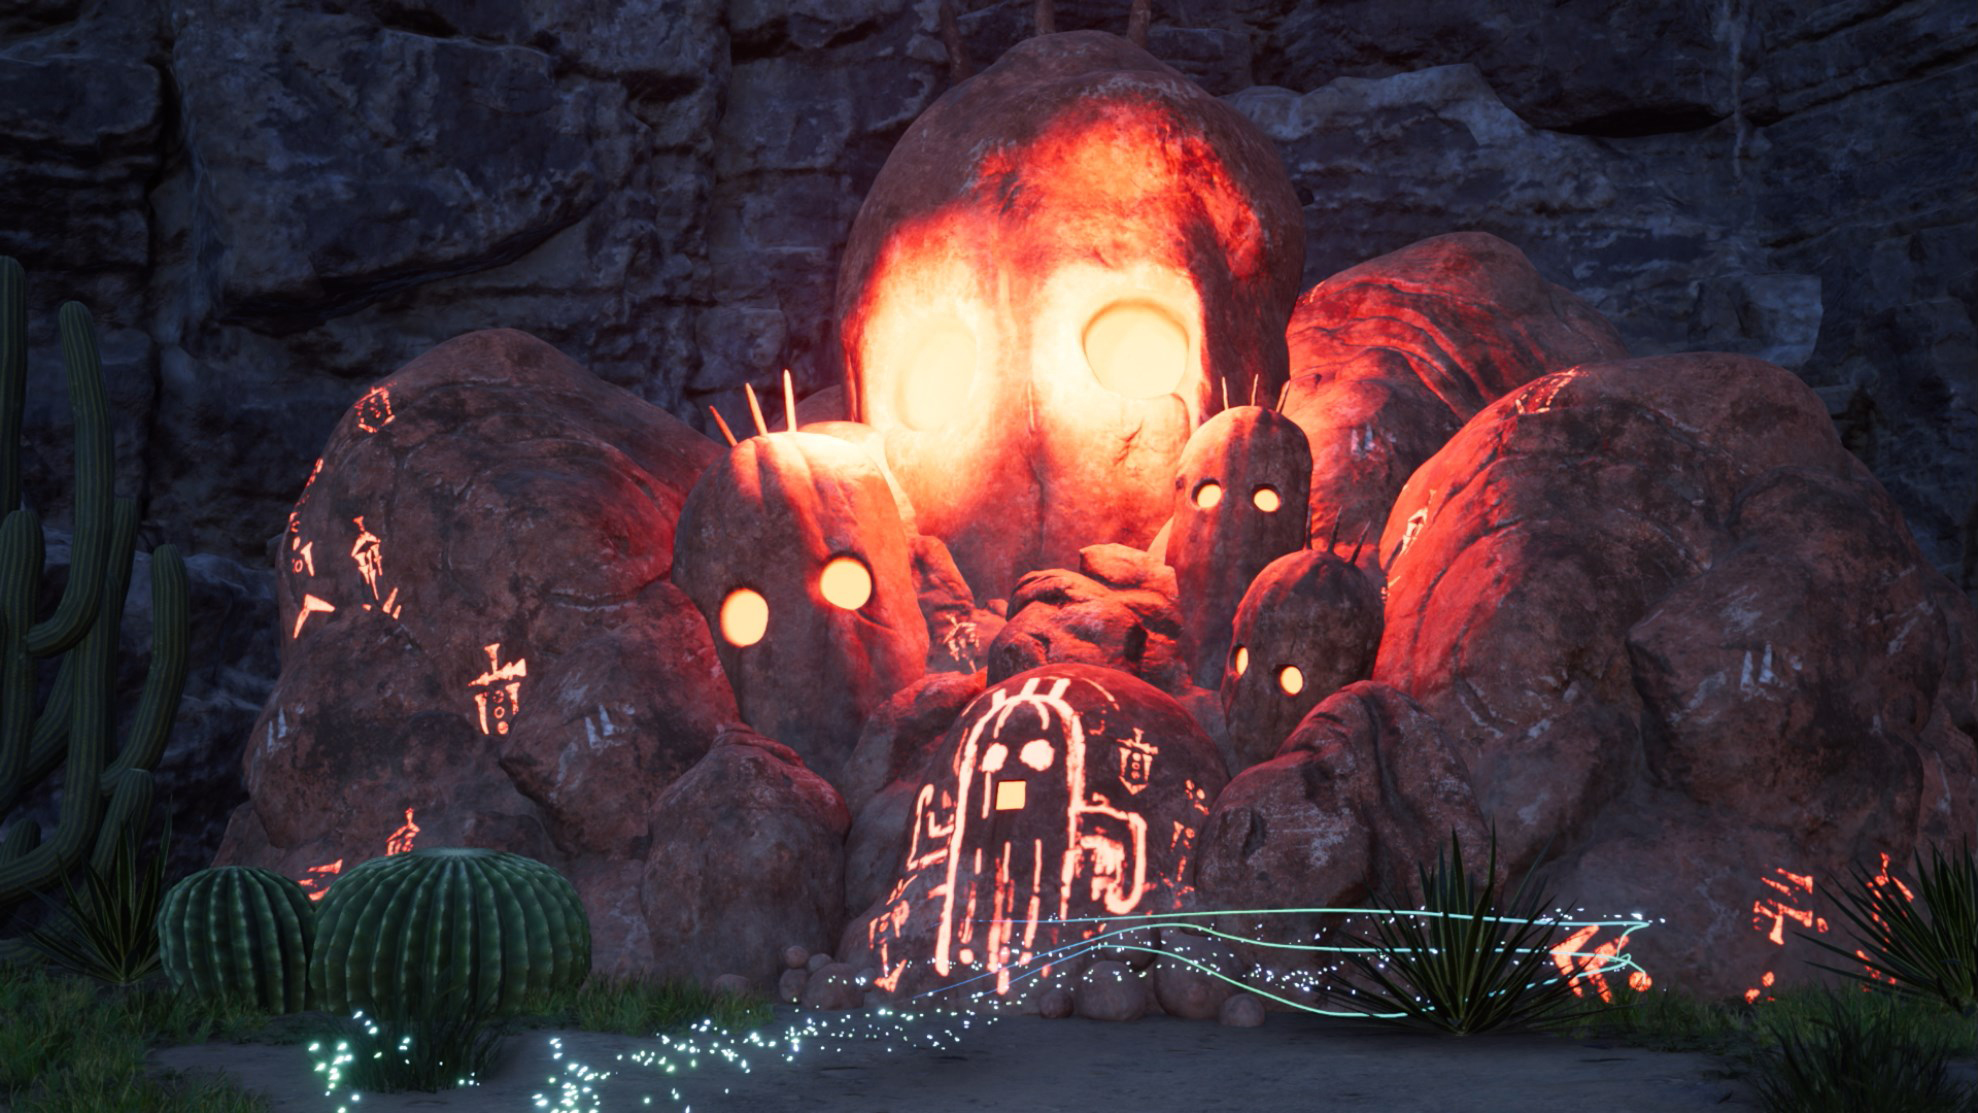 A glowing rock made up of cactuar-like shapes in Final Fantasy 7 Rebirth